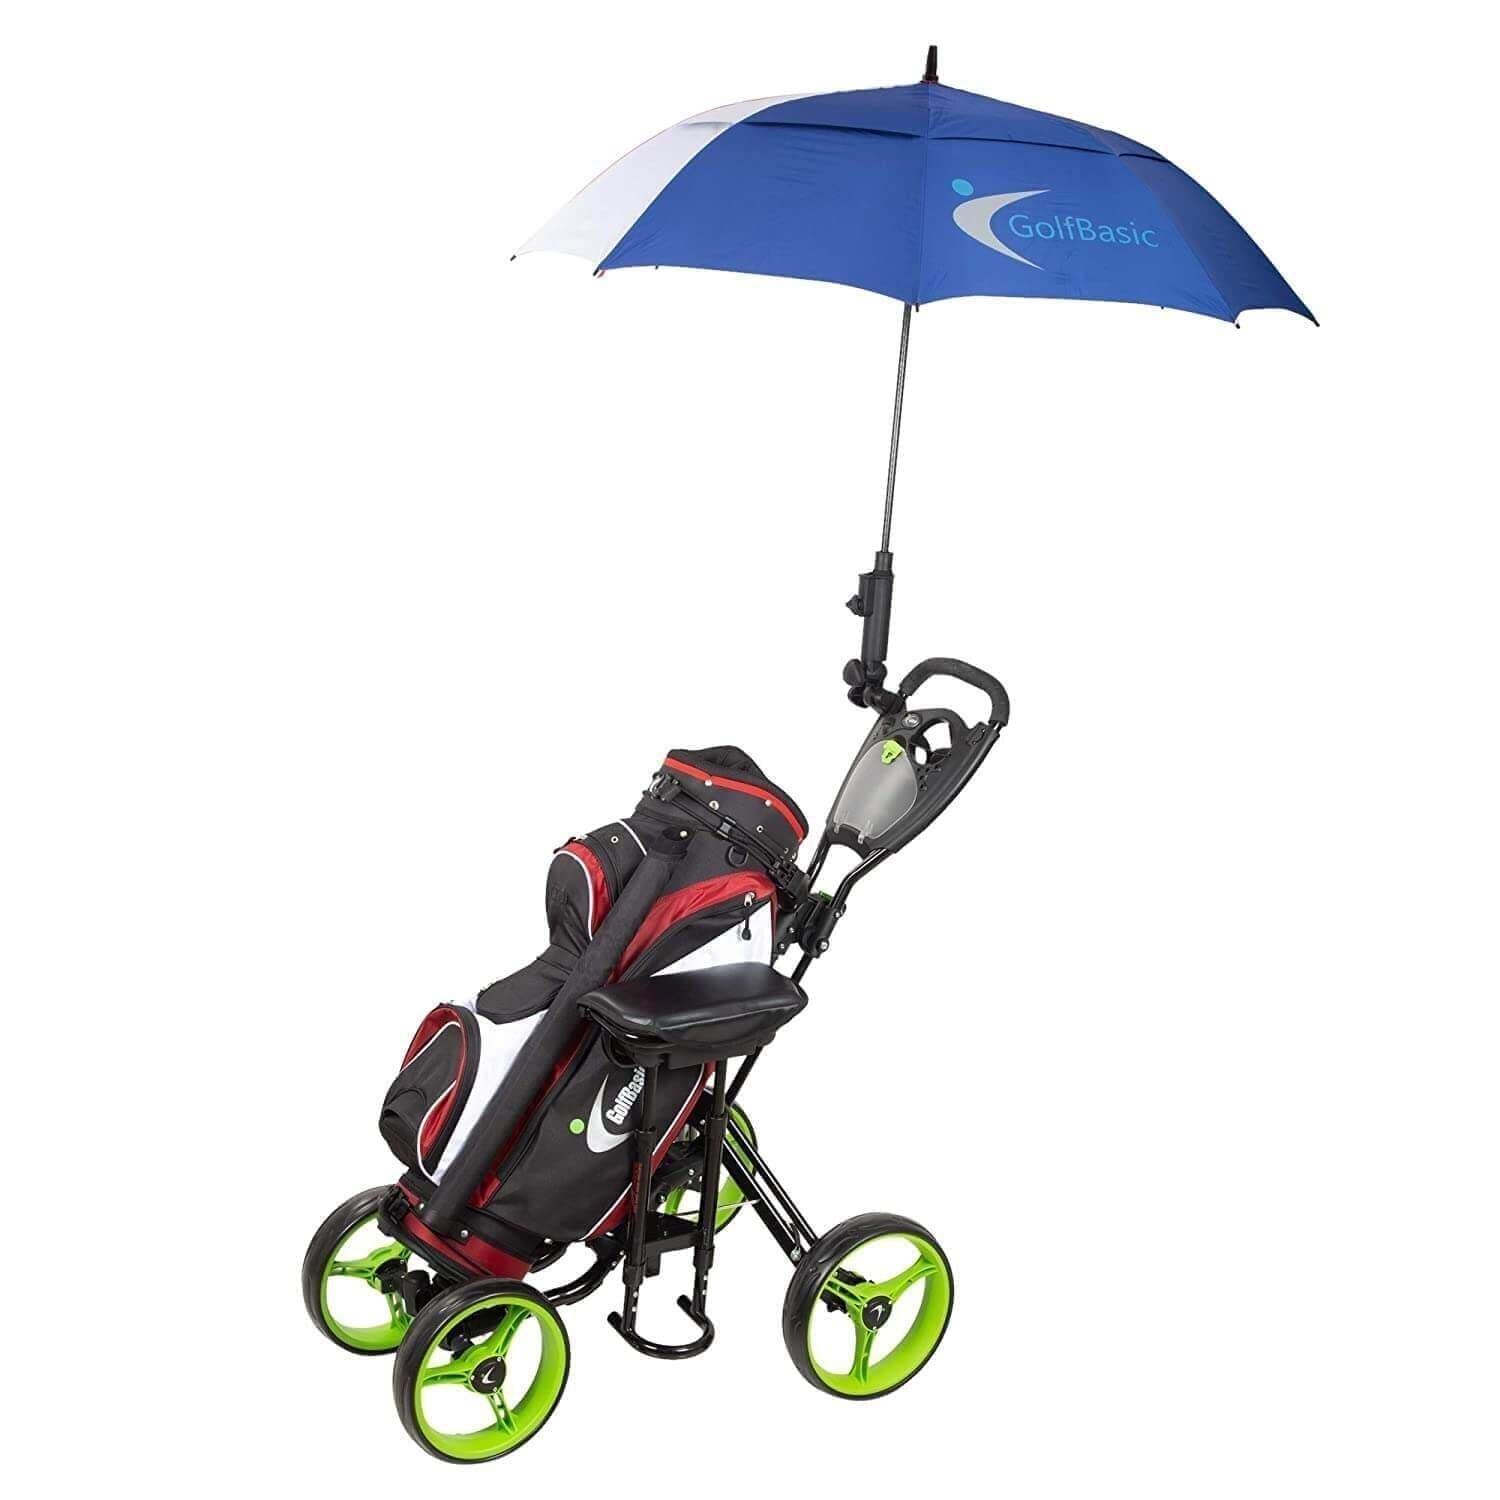 GolfBasic Seat For Four Wheel Trolley In India | golfedge  | India’s Favourite Online Golf Store | golfedgeindia.com